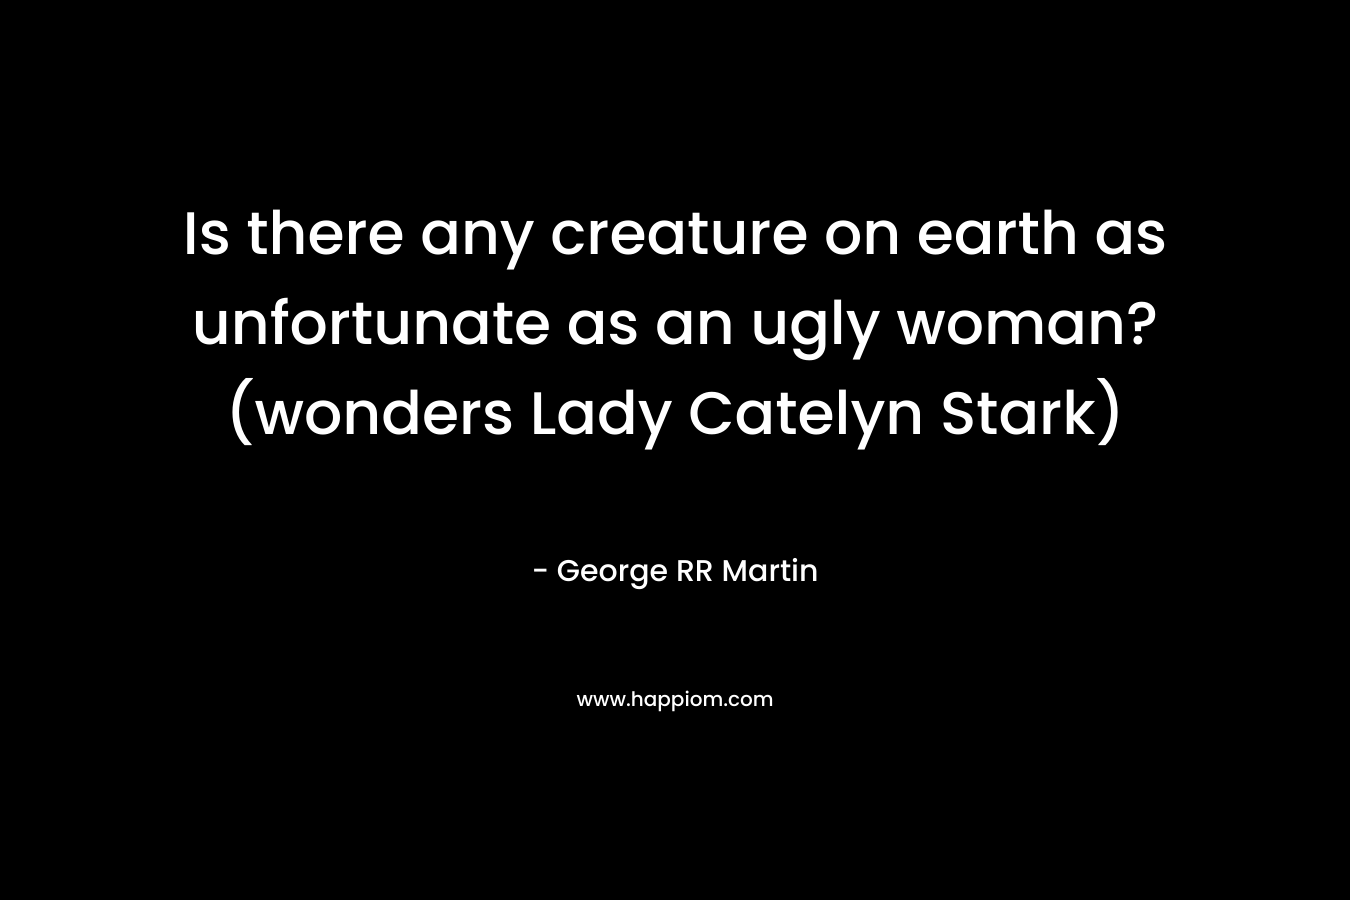 Is there any creature on earth as unfortunate as an ugly woman? (wonders Lady Catelyn Stark)